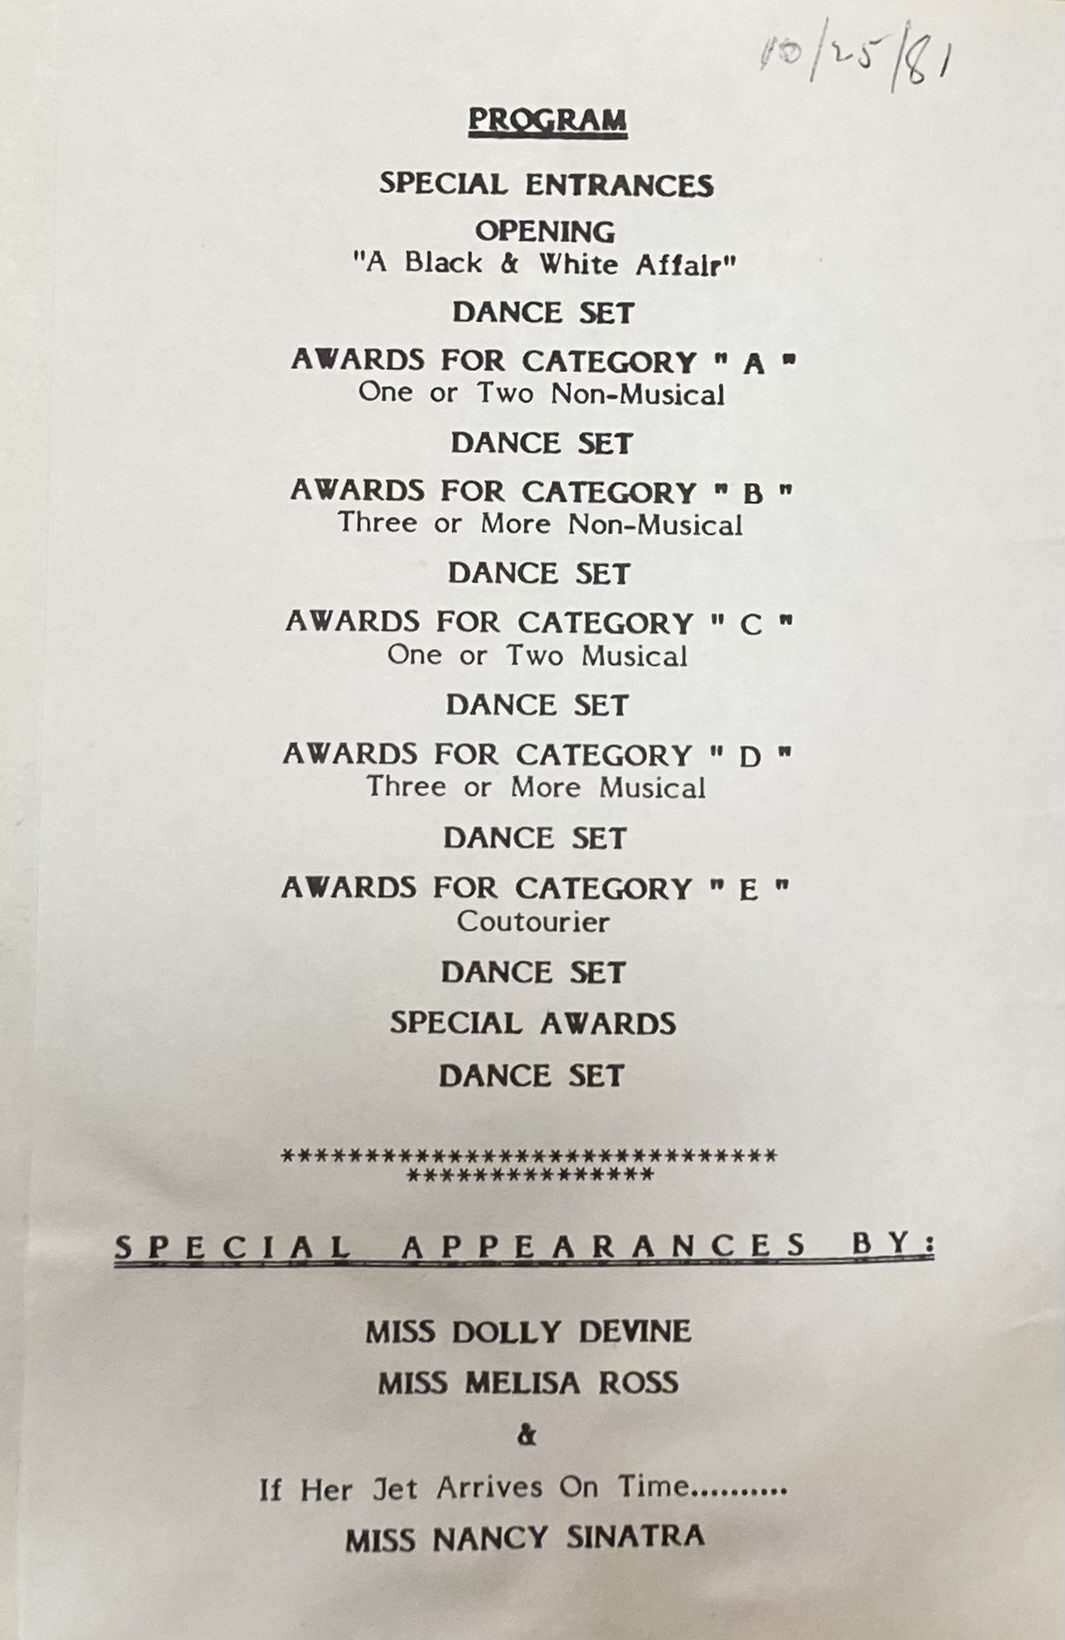 White page with black text listing a "program" with awards categories "A" through "E"; dance sets; special apprearances by Miss Dolly Devine, Miss Lelisa Ross and Miss Nancy Sinatra "if her jet arrives on time." Handwritten in the top right corner is the date 10/25/81.